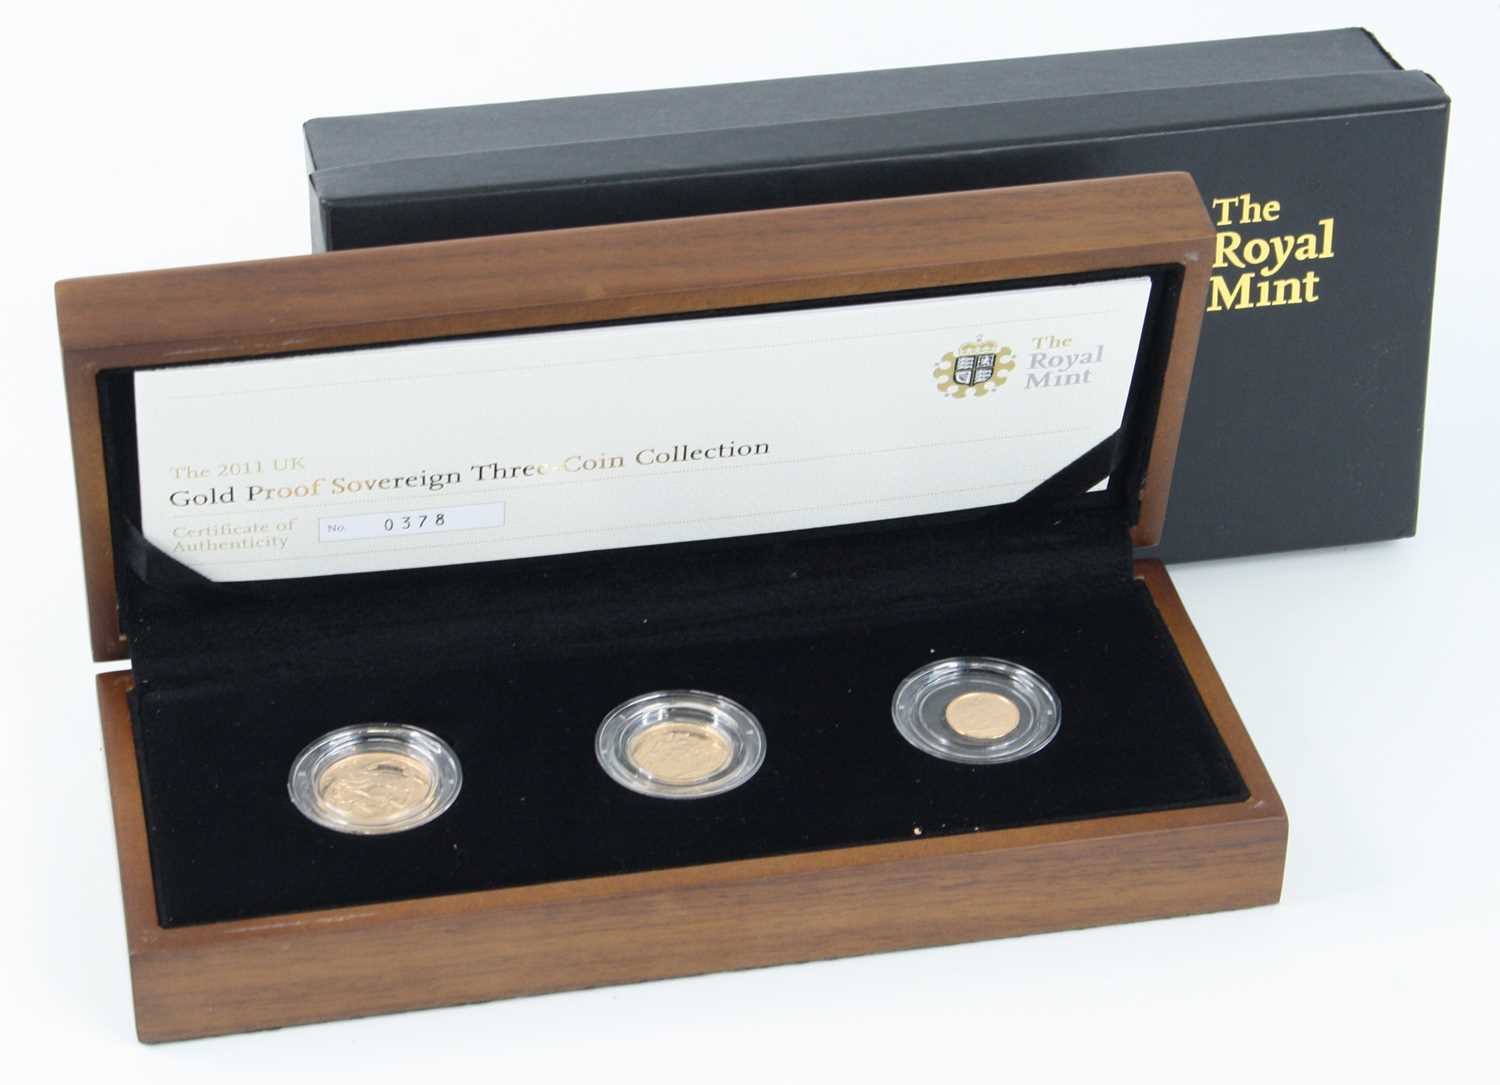 The Royal Mint, 2011 UK Gold Proof Sovereign Three-Coin Collection, full, half and quarter